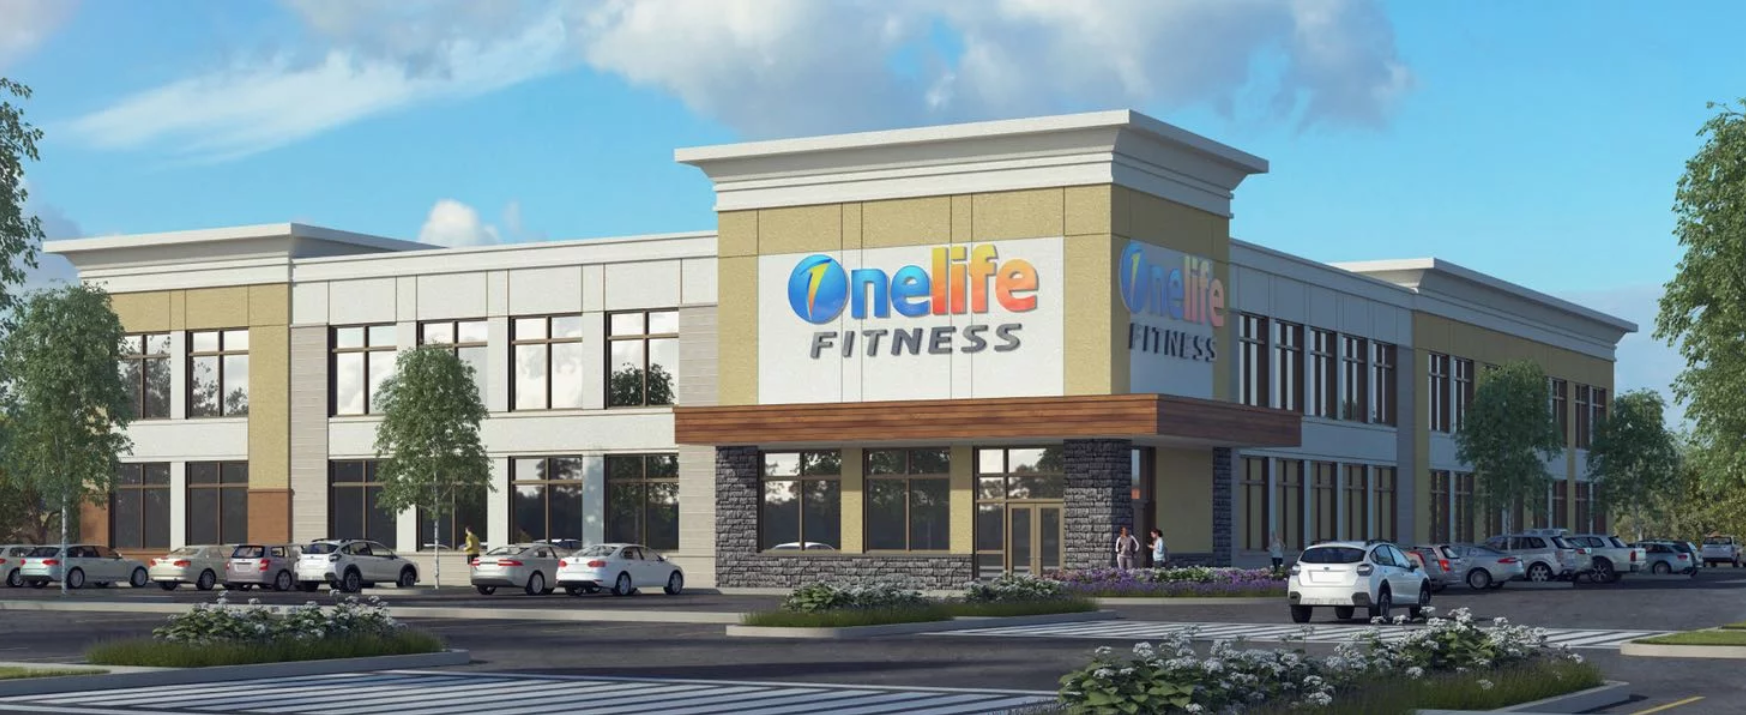 Onelife Fitness - Tech Center